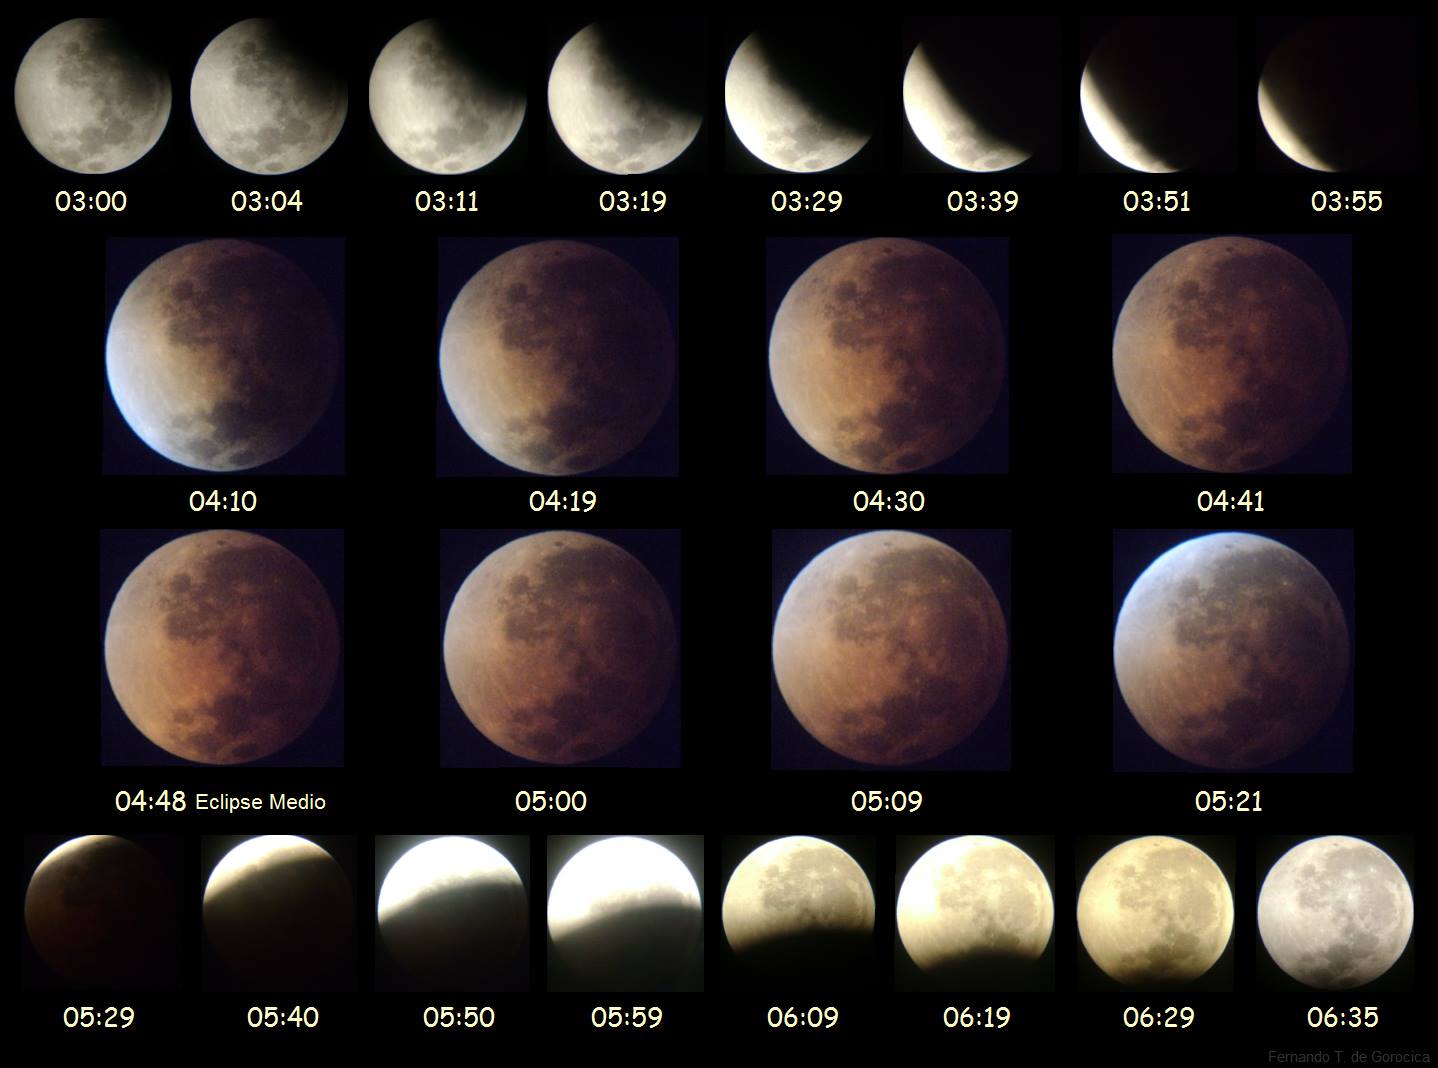 File:Fases Eclipse Total.jpg - Wikimedia Commons